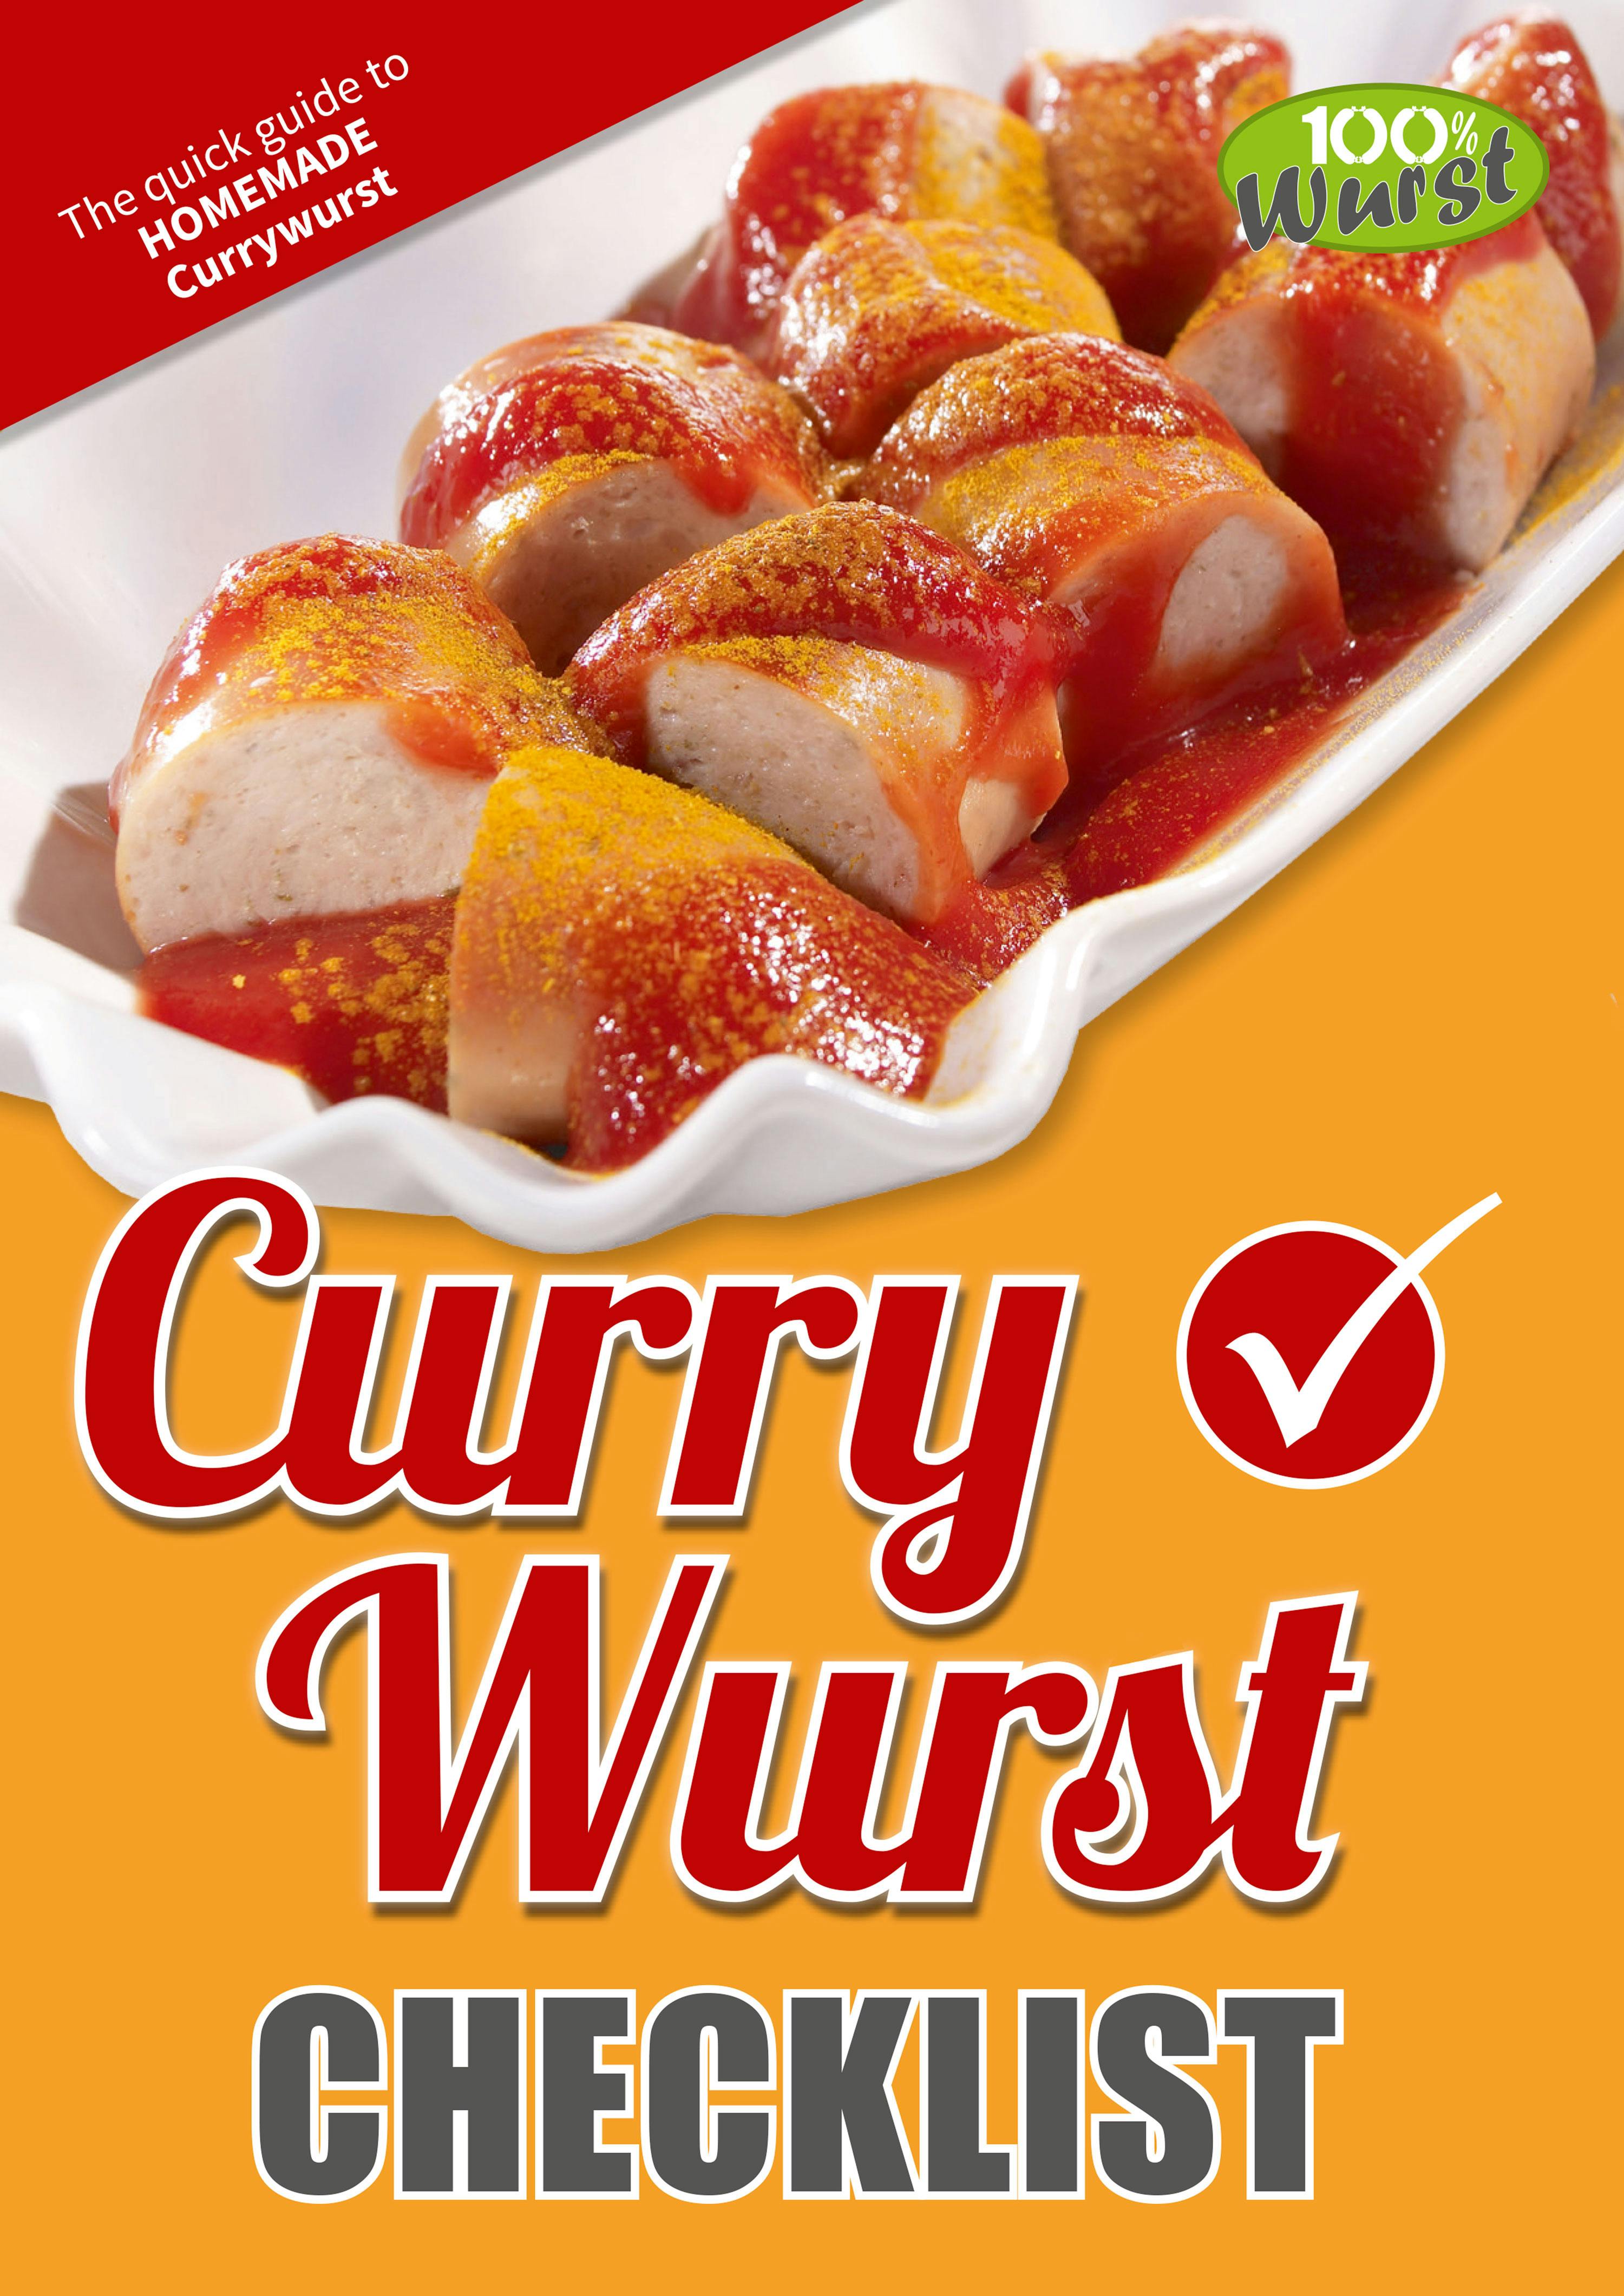 Checklist: Currywurst: The quick guide to homemade Currywurst - 100% Wurst